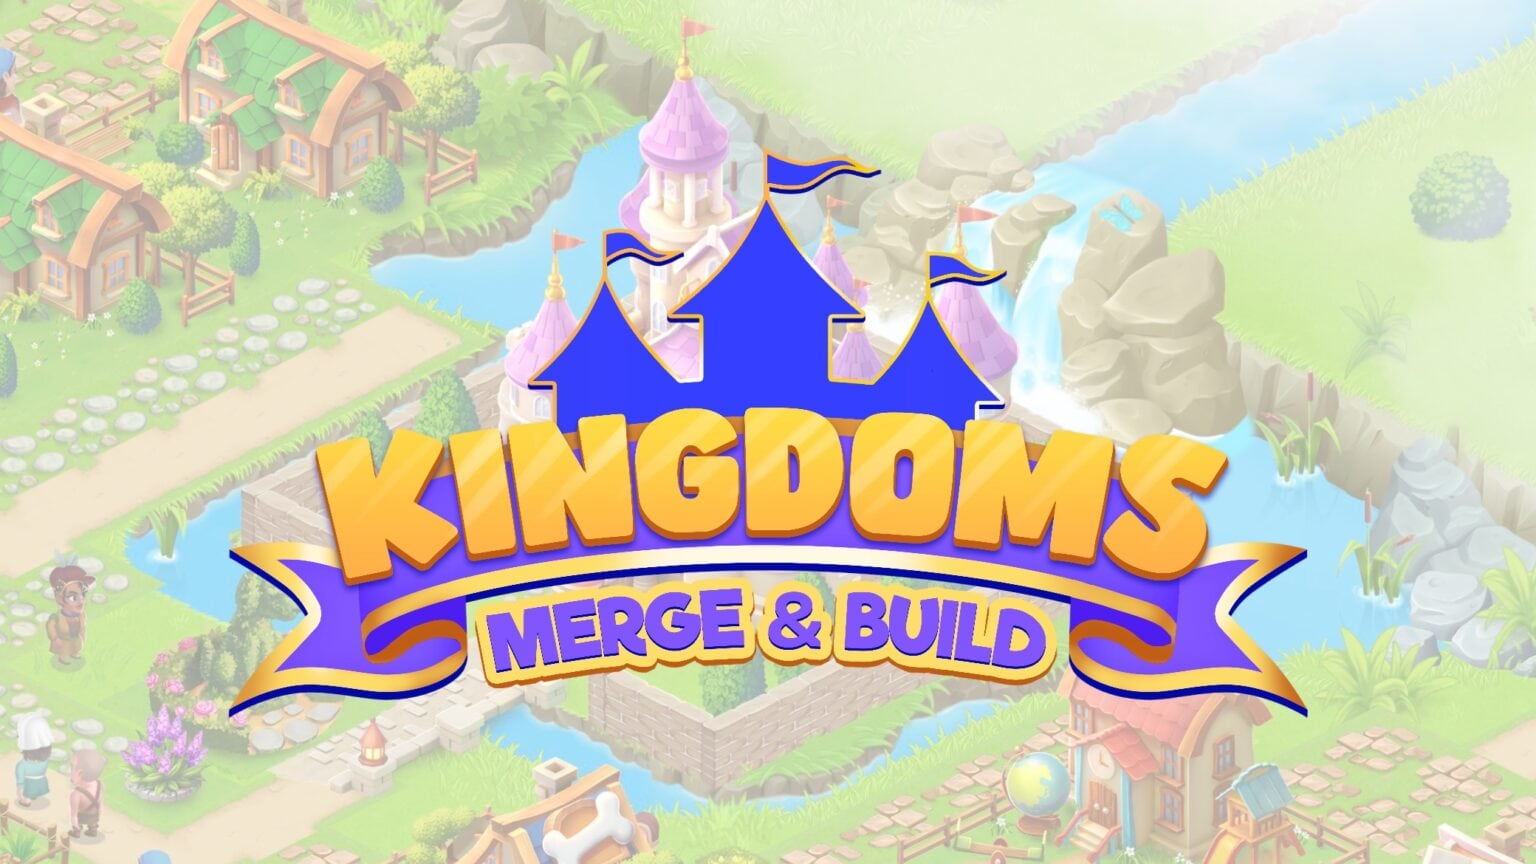 'Kingdoms: Merge & Build' from Cherrypick Games